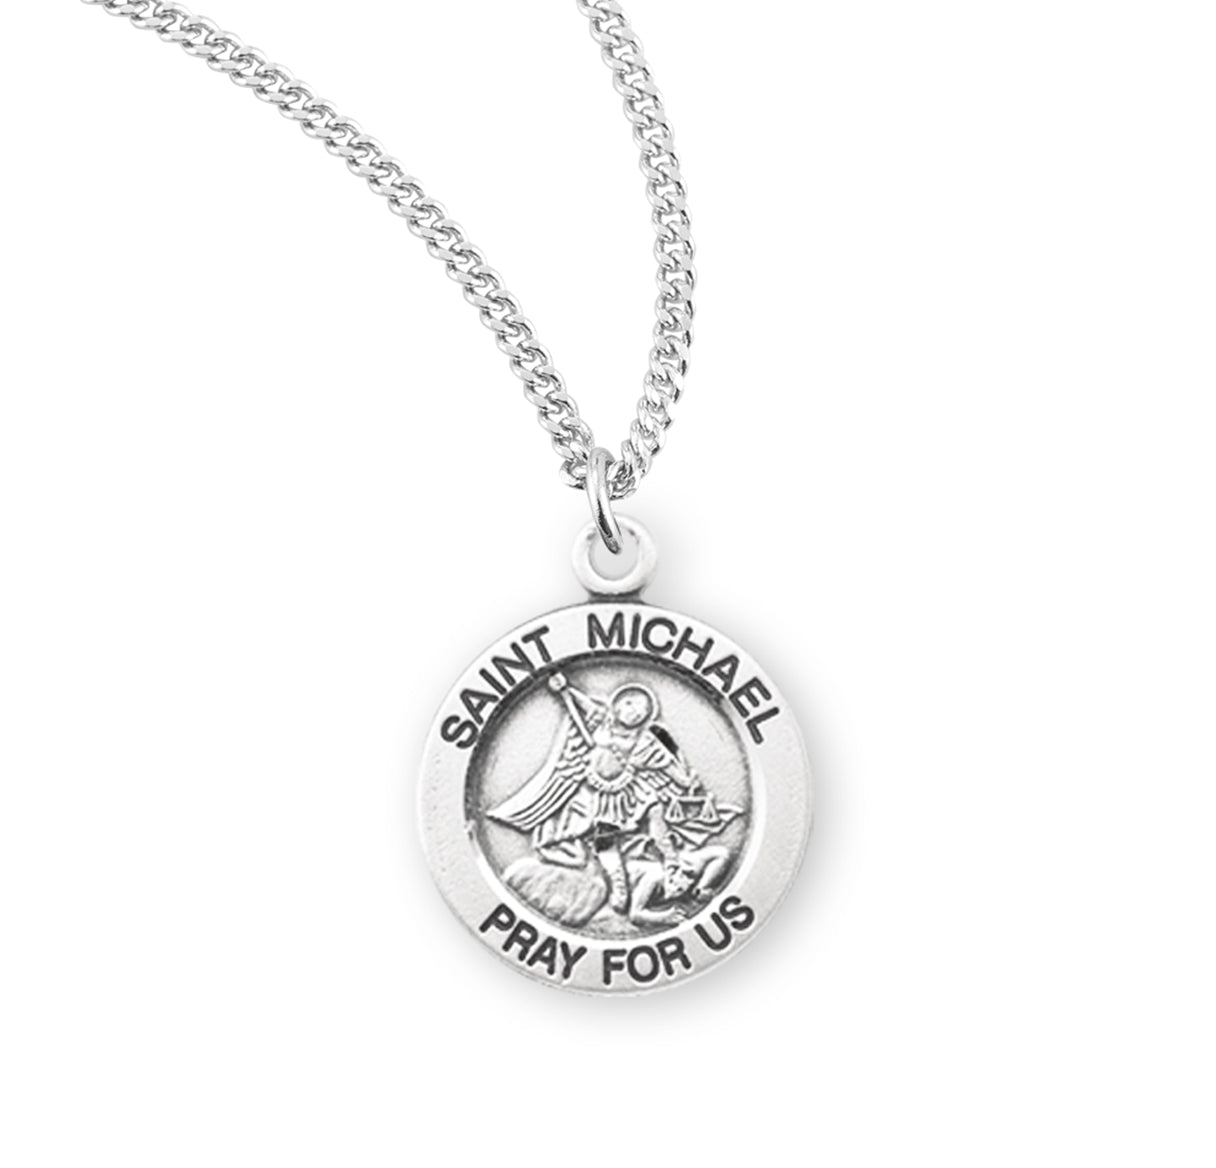 Patron Saint Michael Round Sterling Silver Medal